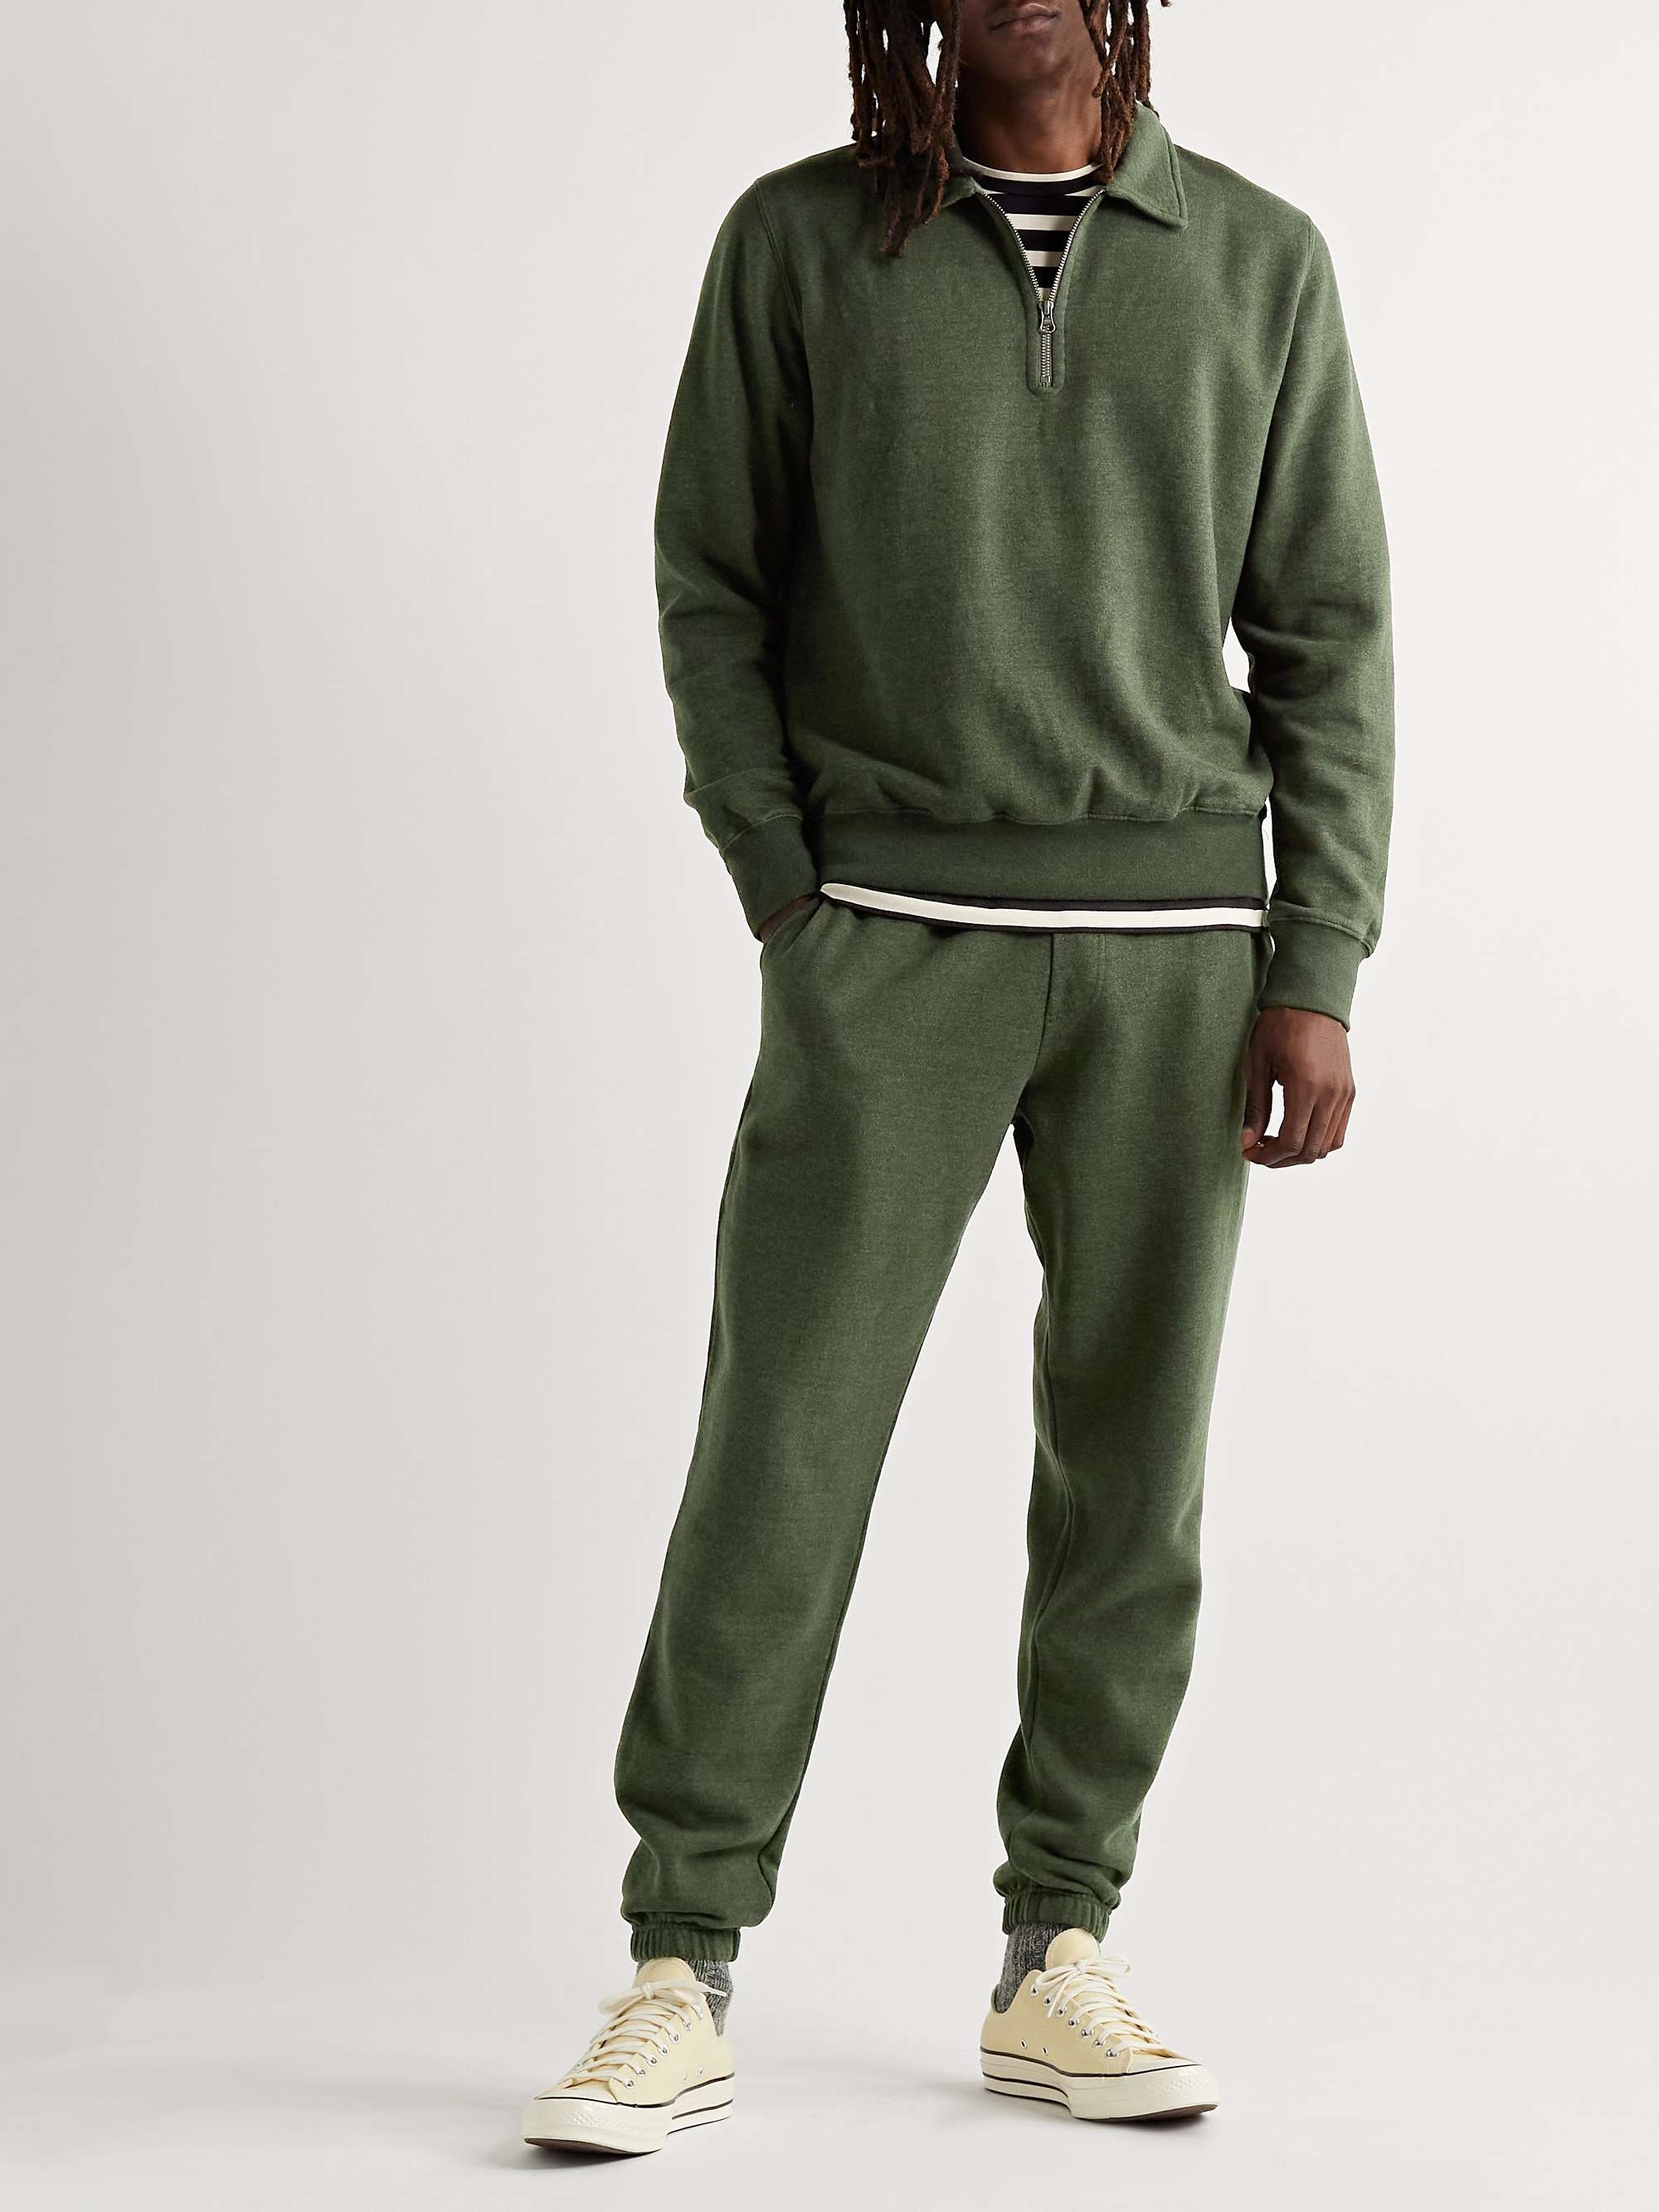 HARTFORD Brushed Cotton, Lyocell, Modal and Wool-Blend Sweatpants